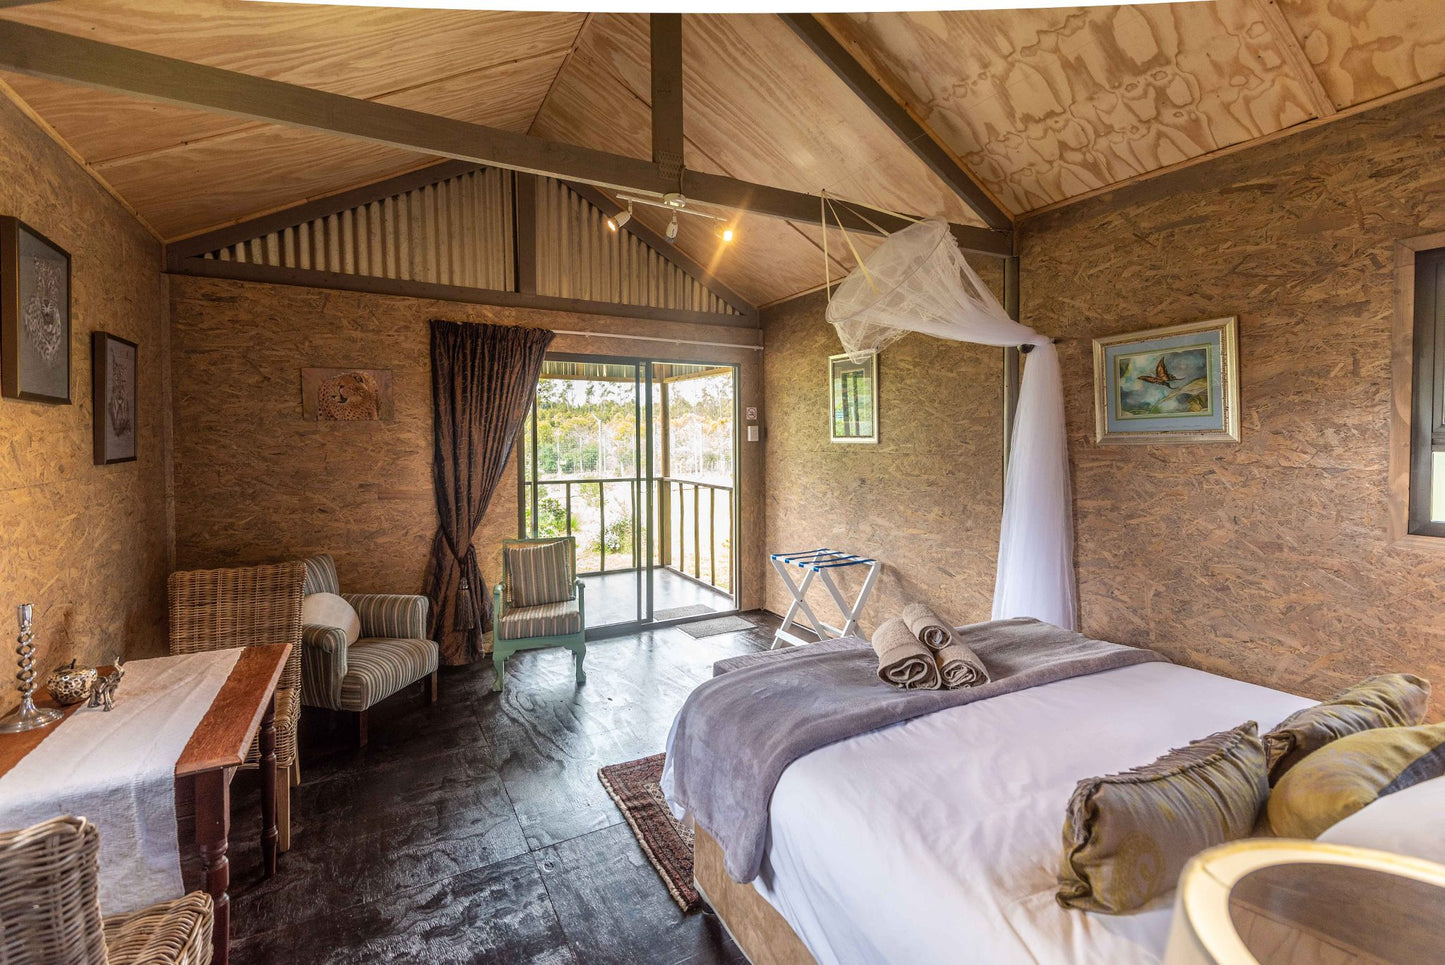 Tenikwa Lion Cabins The Crags Western Cape South Africa Bedroom